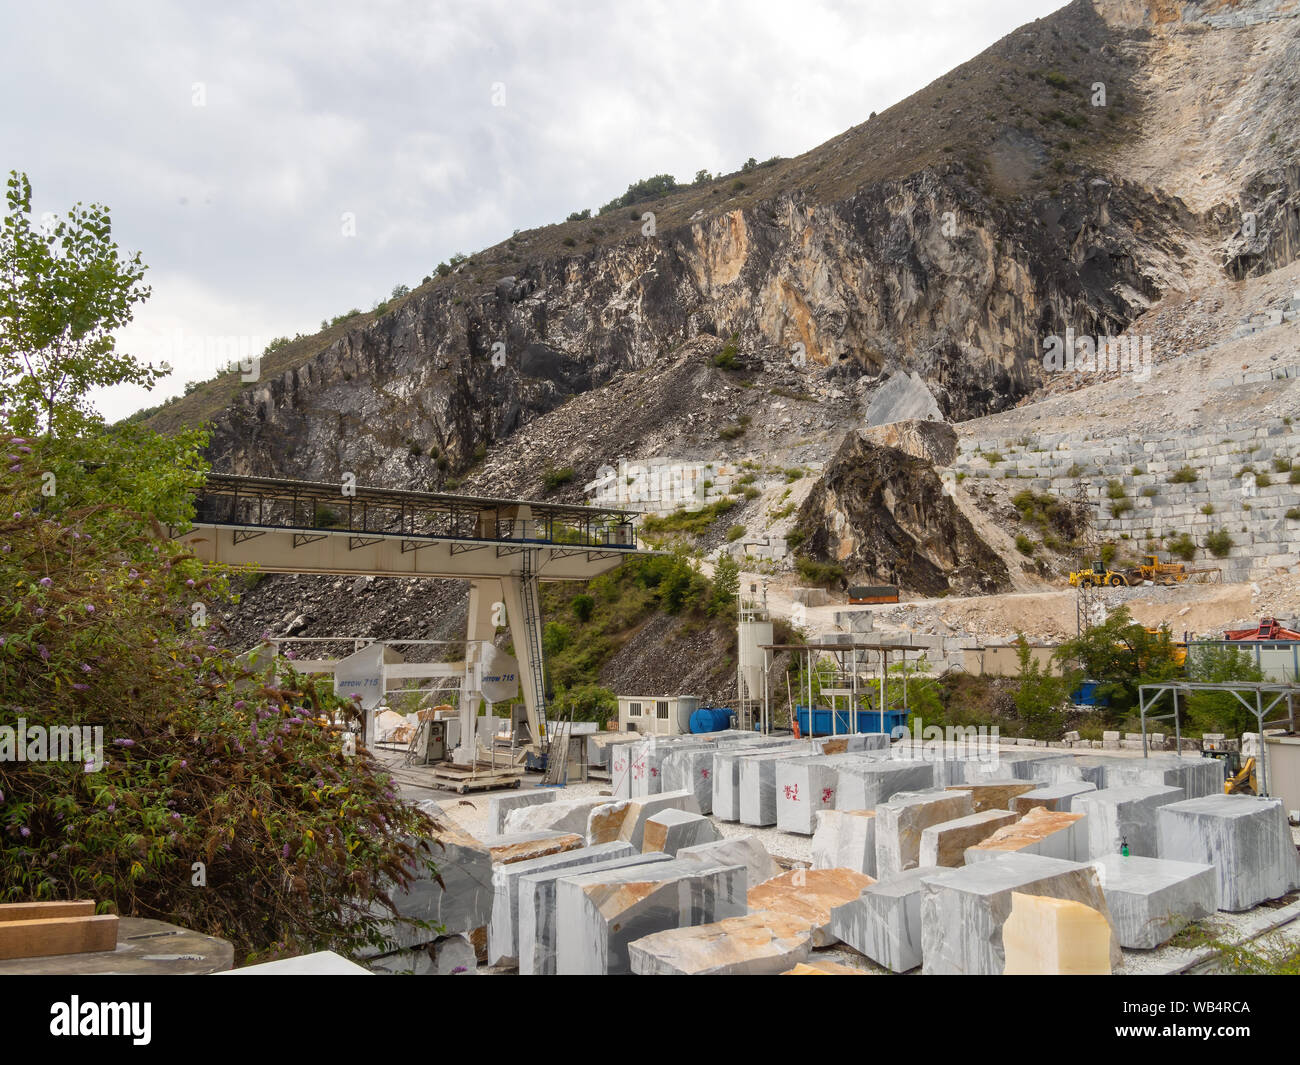 FANTISCRITTI, CARRARA, ITALY - AUGUST 23, 2019: Marble quarrying has been a major industry for millenia. Here, cut blocks await transporation. Stock Photo